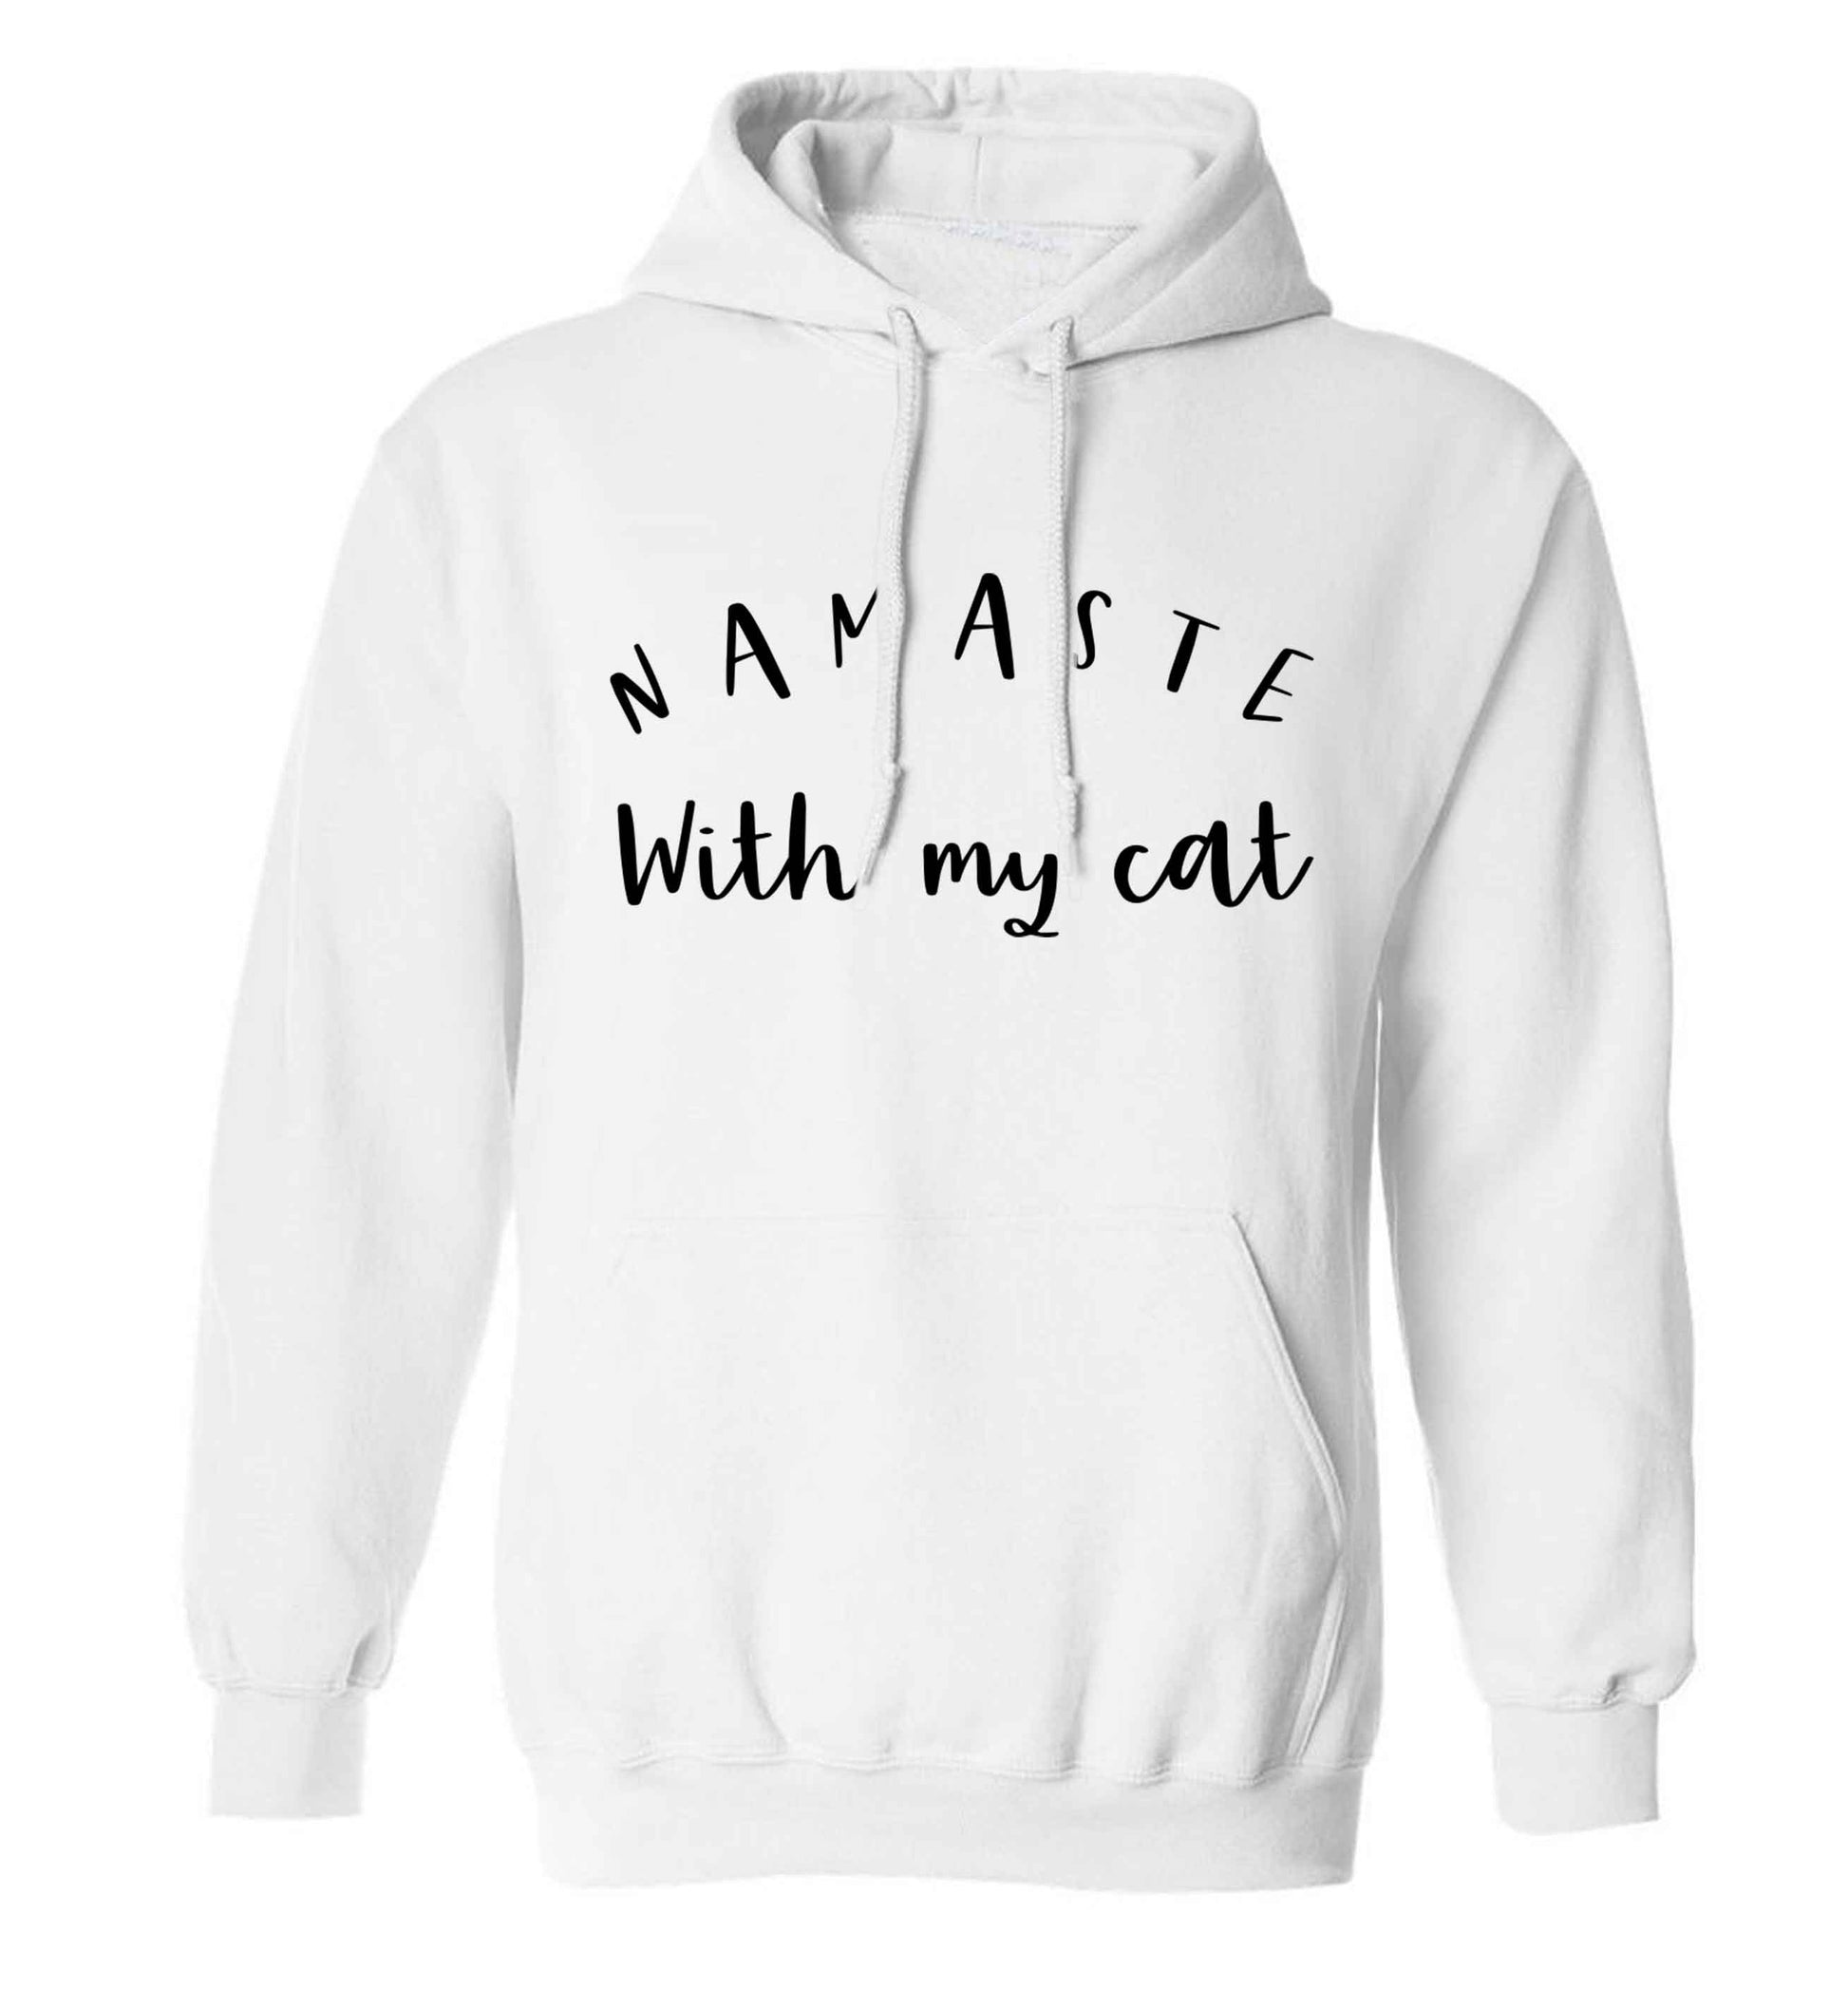 Namaste with my cat adults unisex white hoodie 2XL